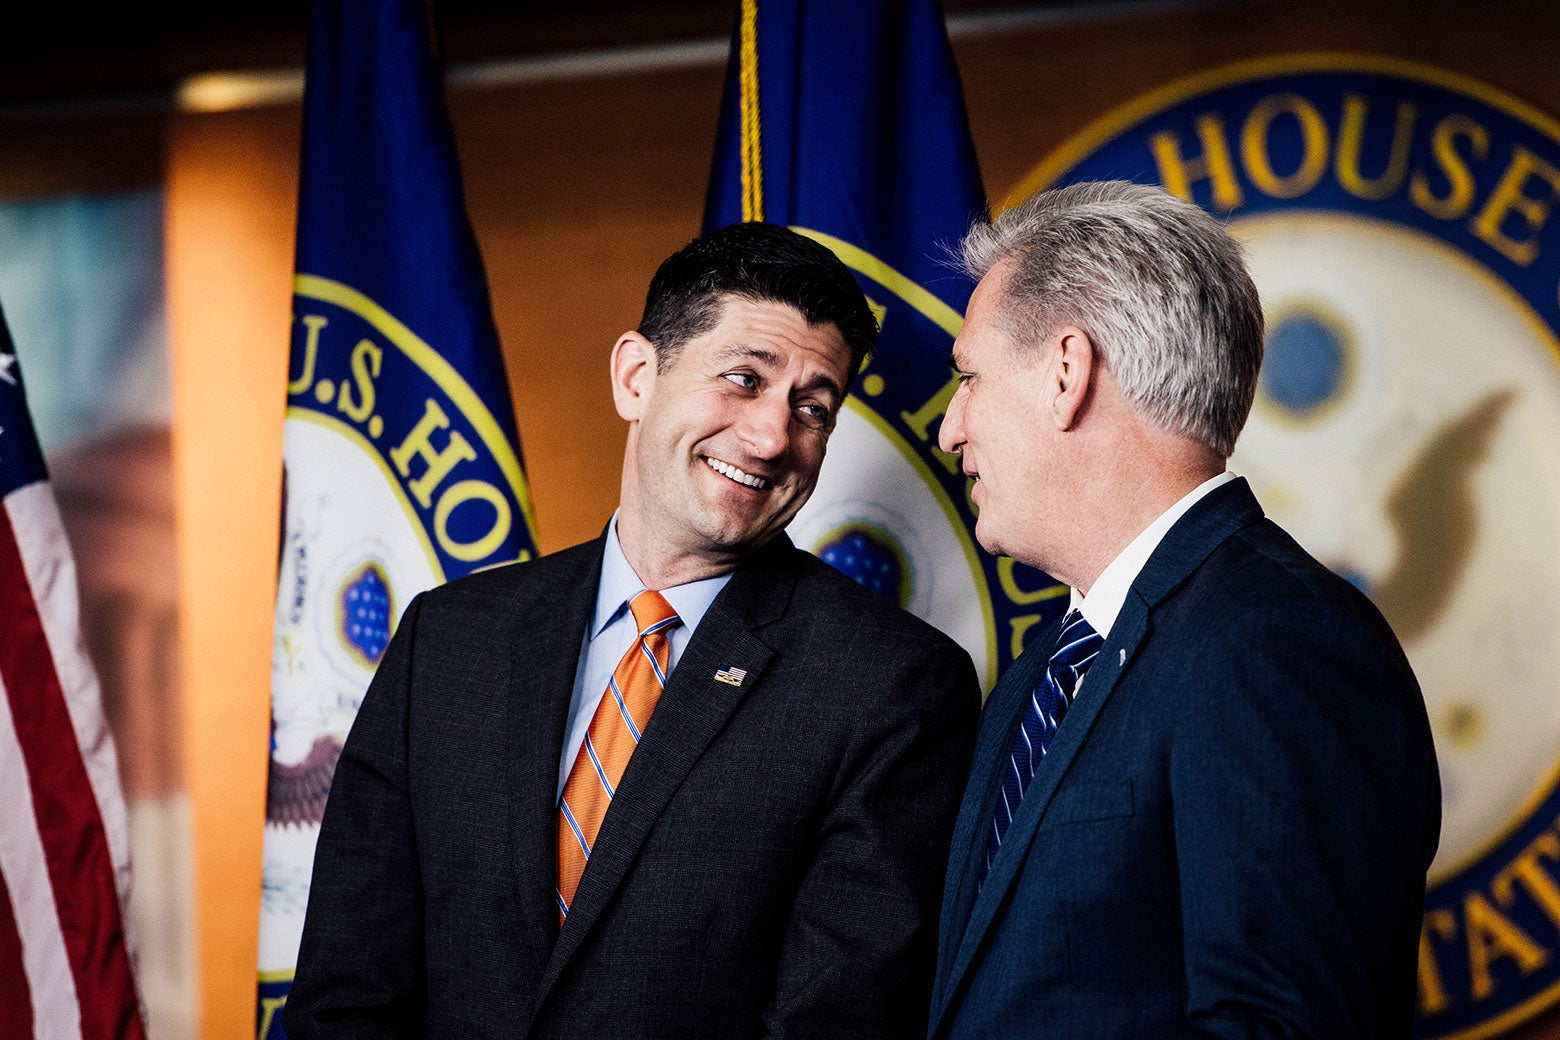 Speaker of the House Paul Ryan and House Majority Leader Kevin McCarthy talk during the House GOP press conference in the Capitol following the House Republican Conference meeting on Wednesday.